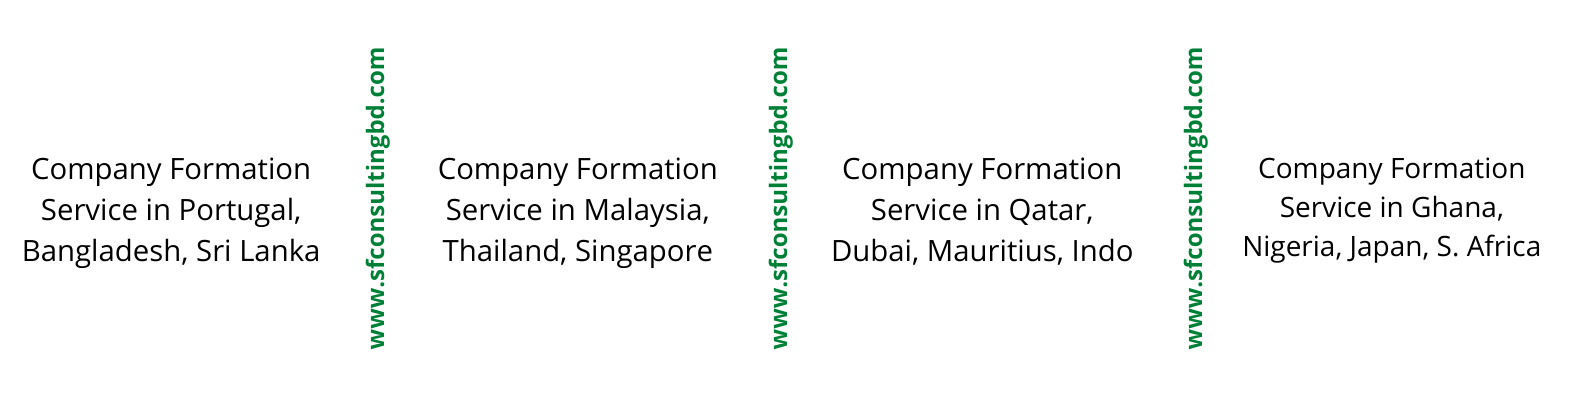 https://www.sfconsultingbd.com/malaysia-foreign-company-registration-formation/company-registration-in-malaysia/